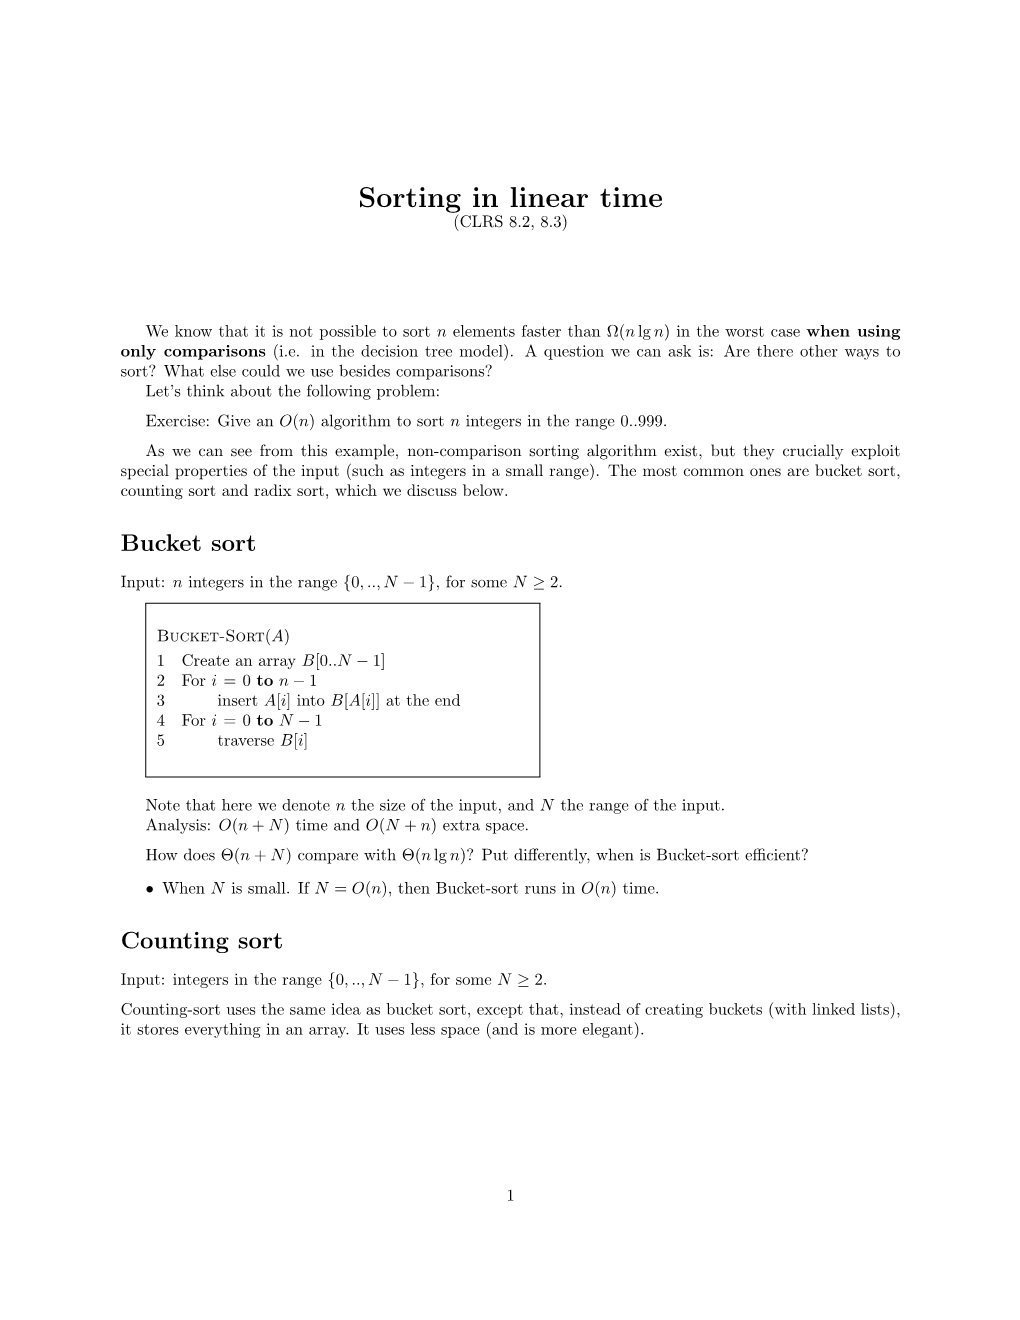 Sorting in Linear Time (CLRS 8.2, 8.3)